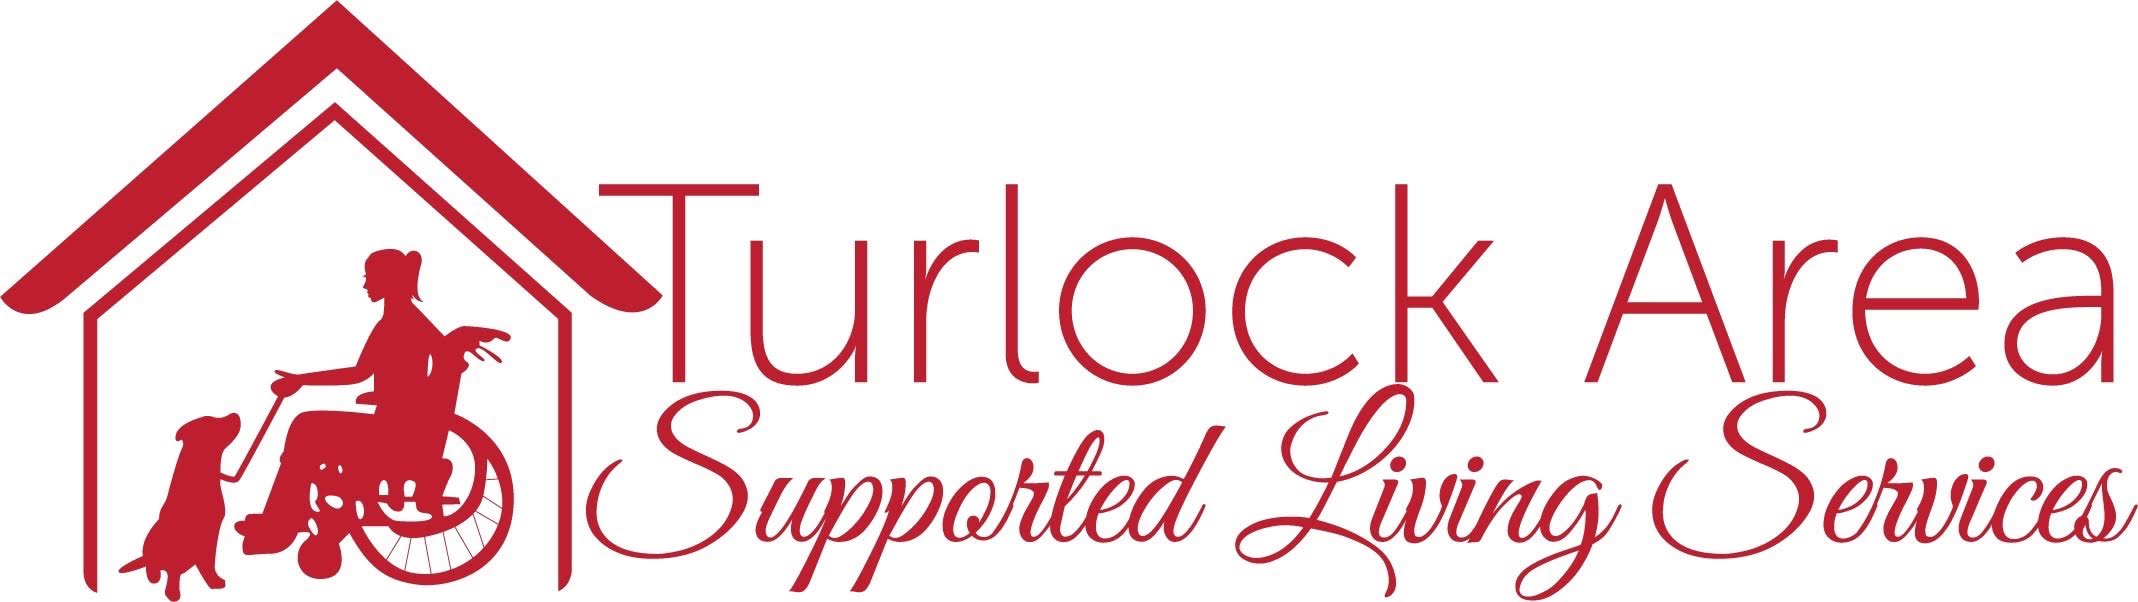 Turlock Area Supported Living Services Inc